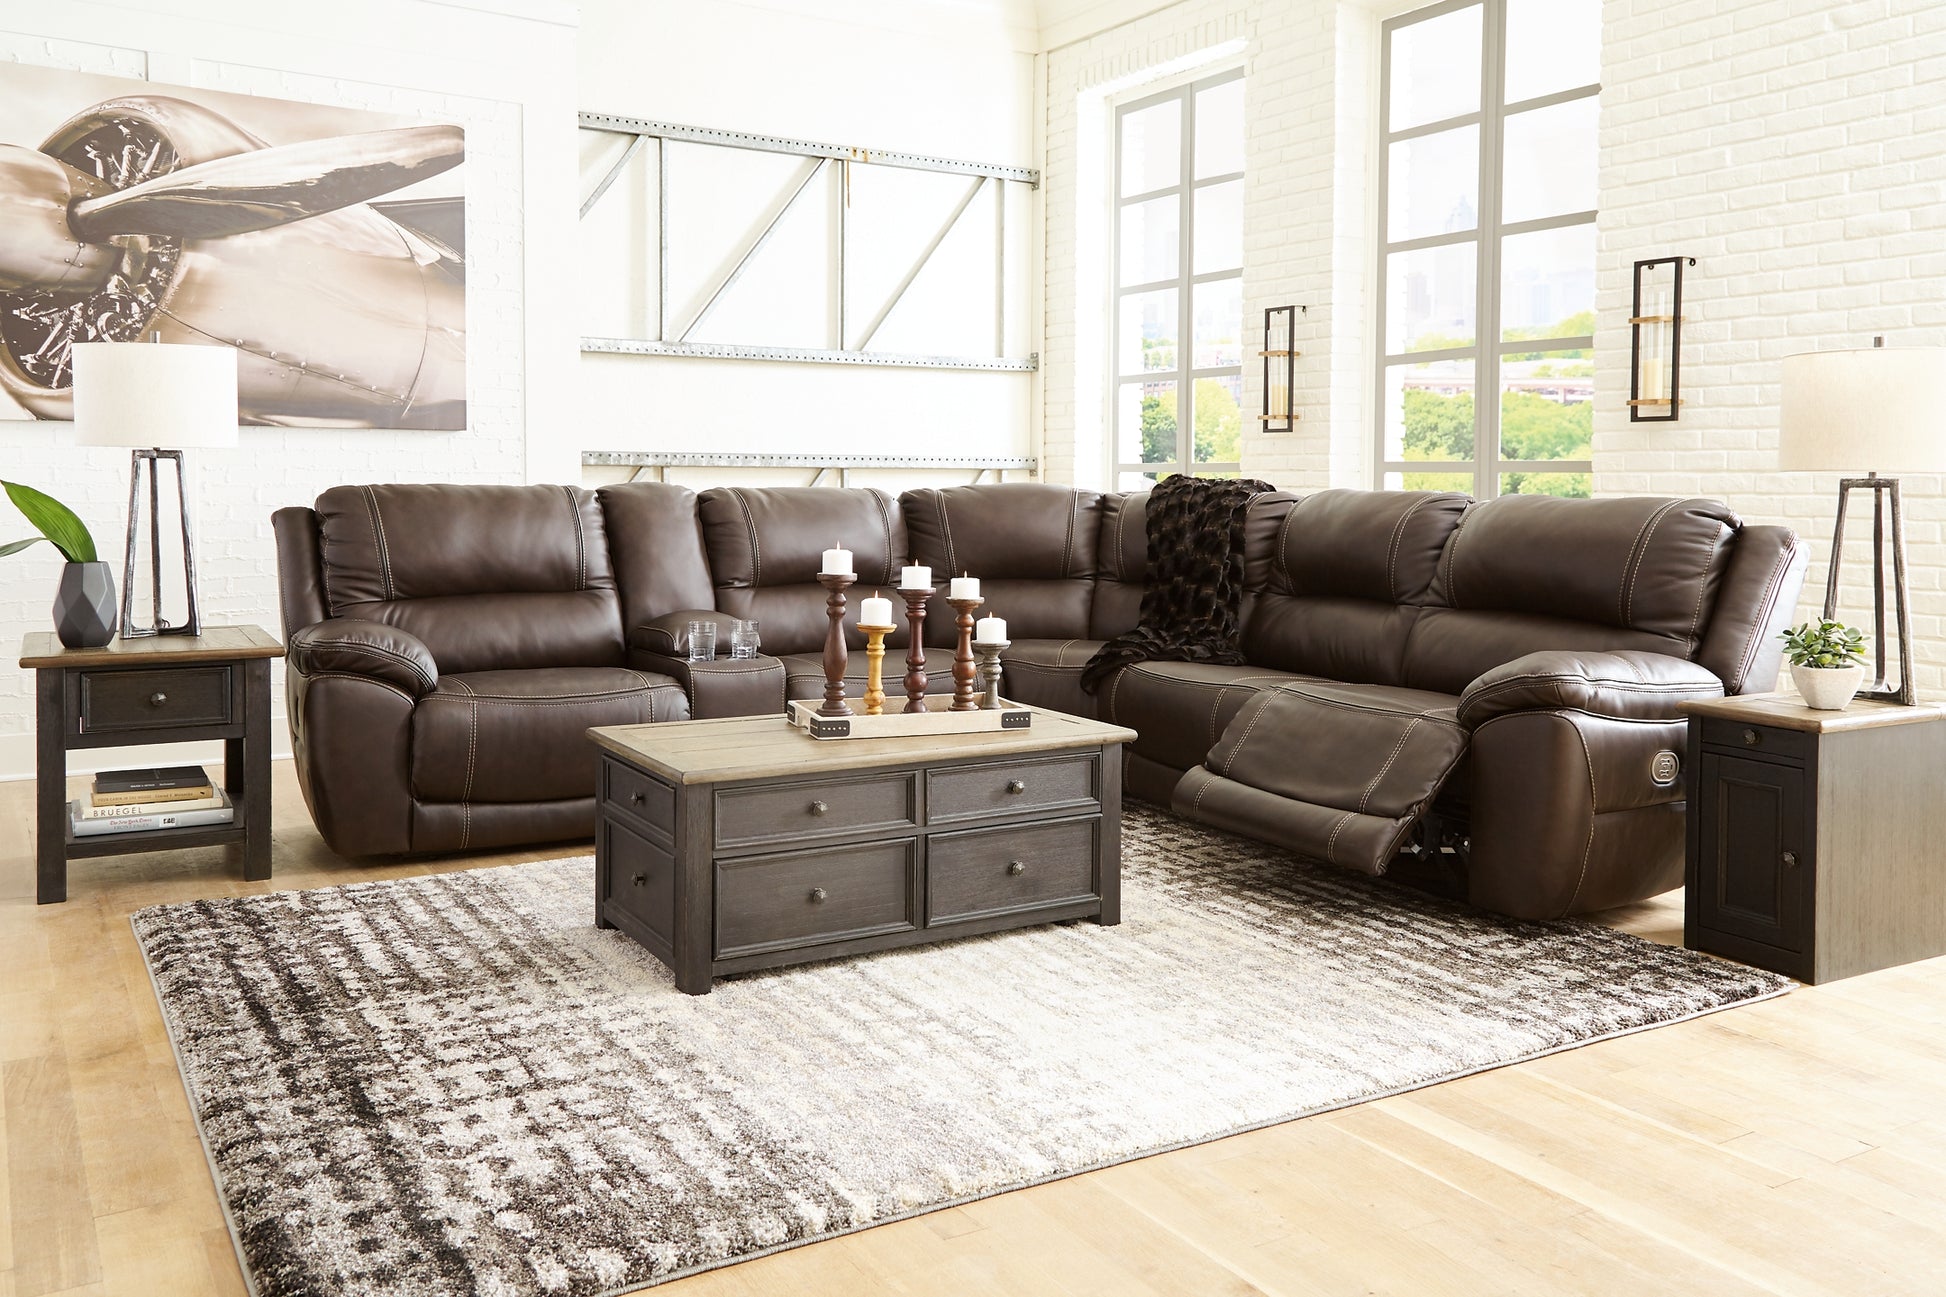 Dunleith 6-Piece Power Reclining Sectional Signature Design by Ashley®